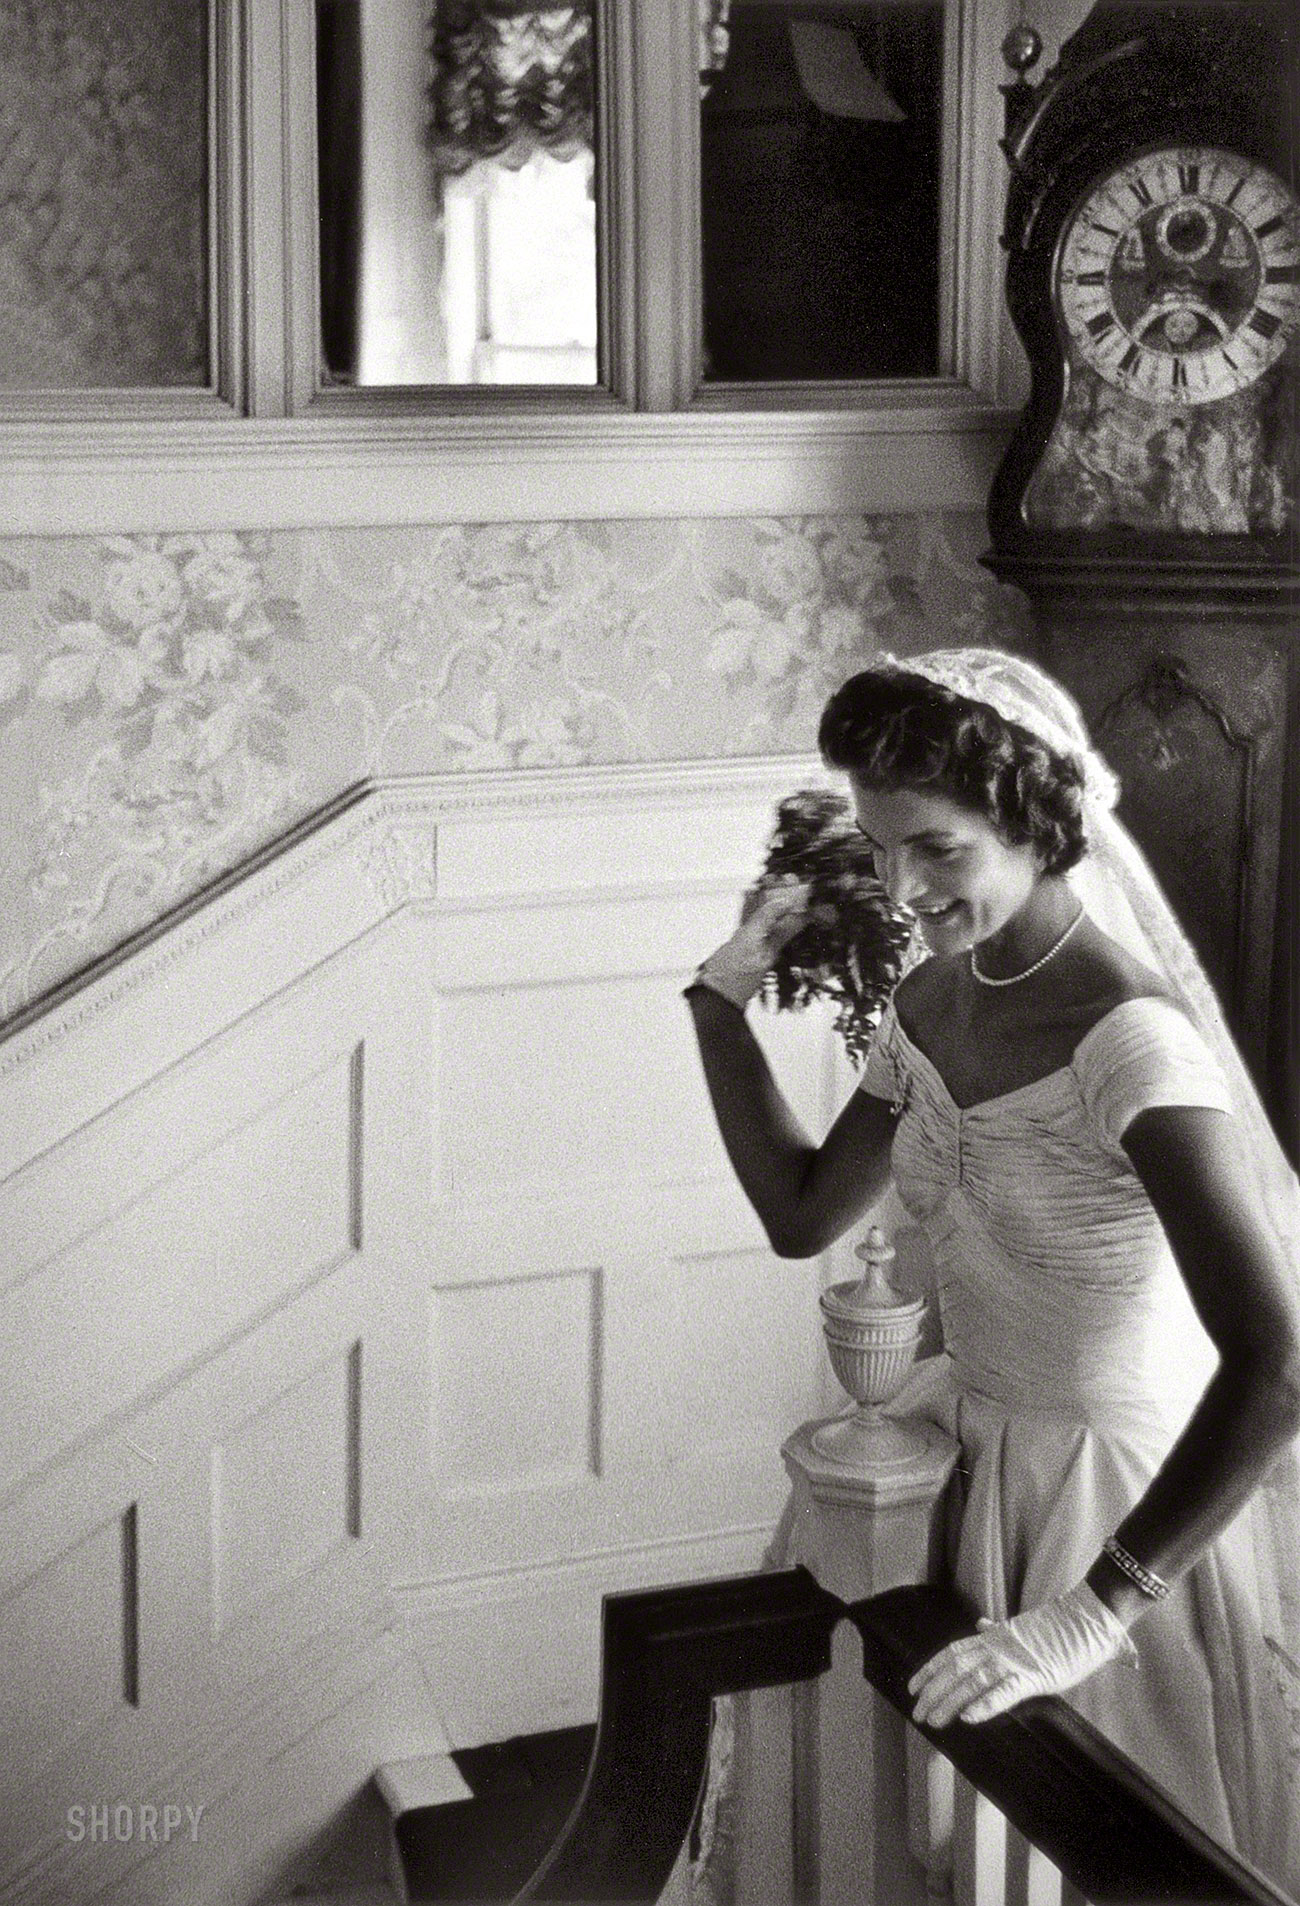 Sept. 12, 1953. Newport, Rhode Island. "Kennedy wedding -- Jacqueline Kennedy throwing the bouquet." Gelatin Silver print by Toni Frissell. View full size.